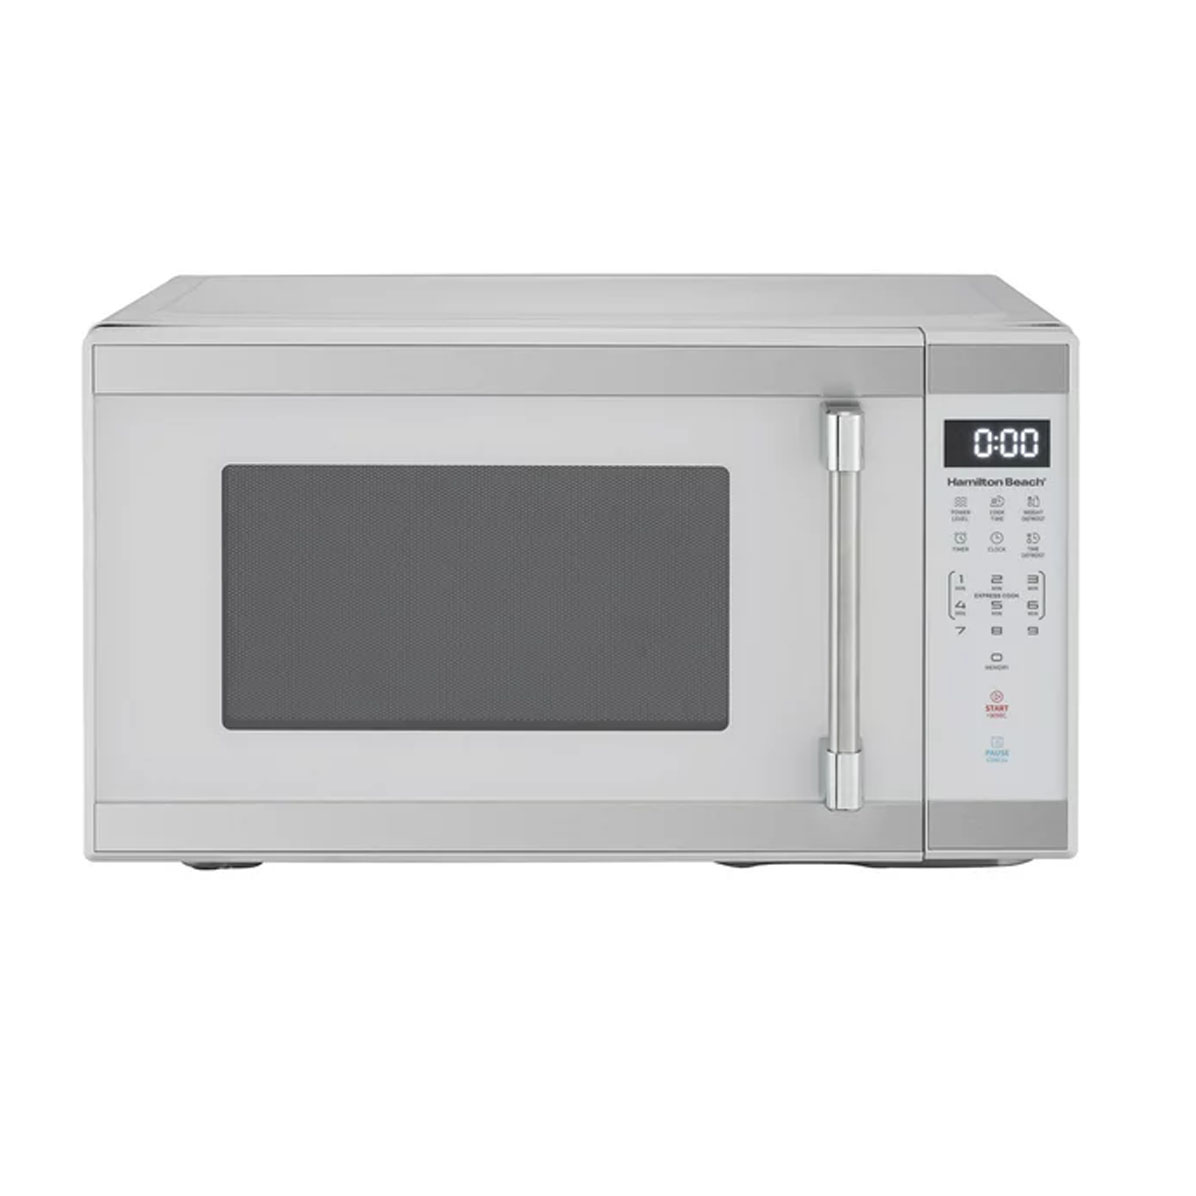 Hamilton Beach Countertop Microwave Oven in stainless steel 